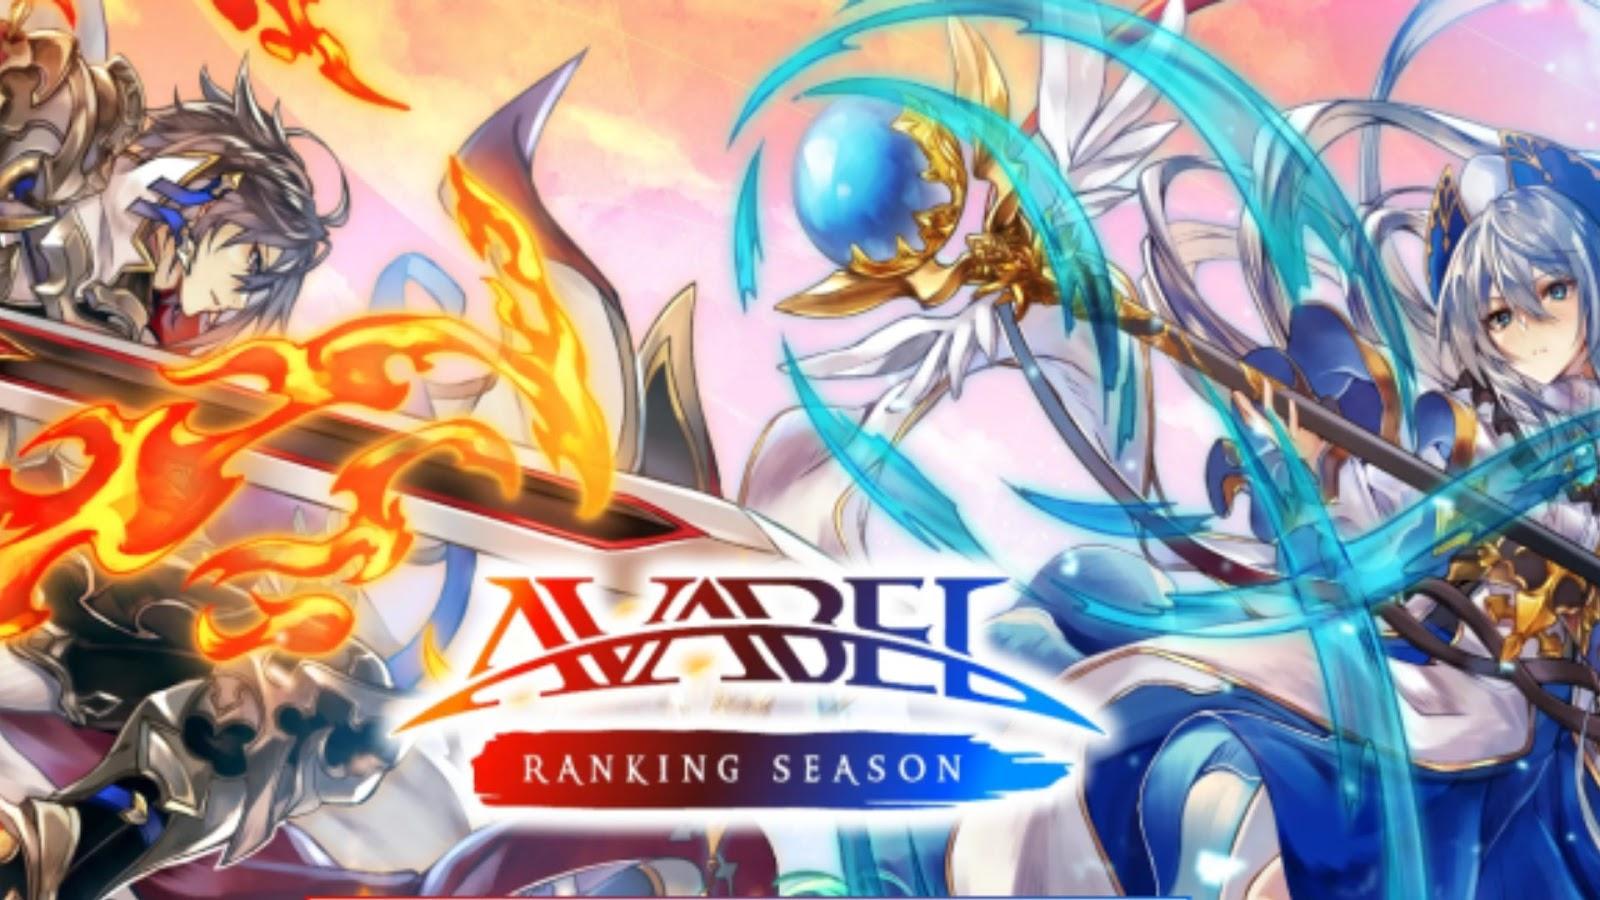 Avars: Avabel Ranking Season Guide, Review And Everything You Need To  Know-Game Guides-Ldplayer